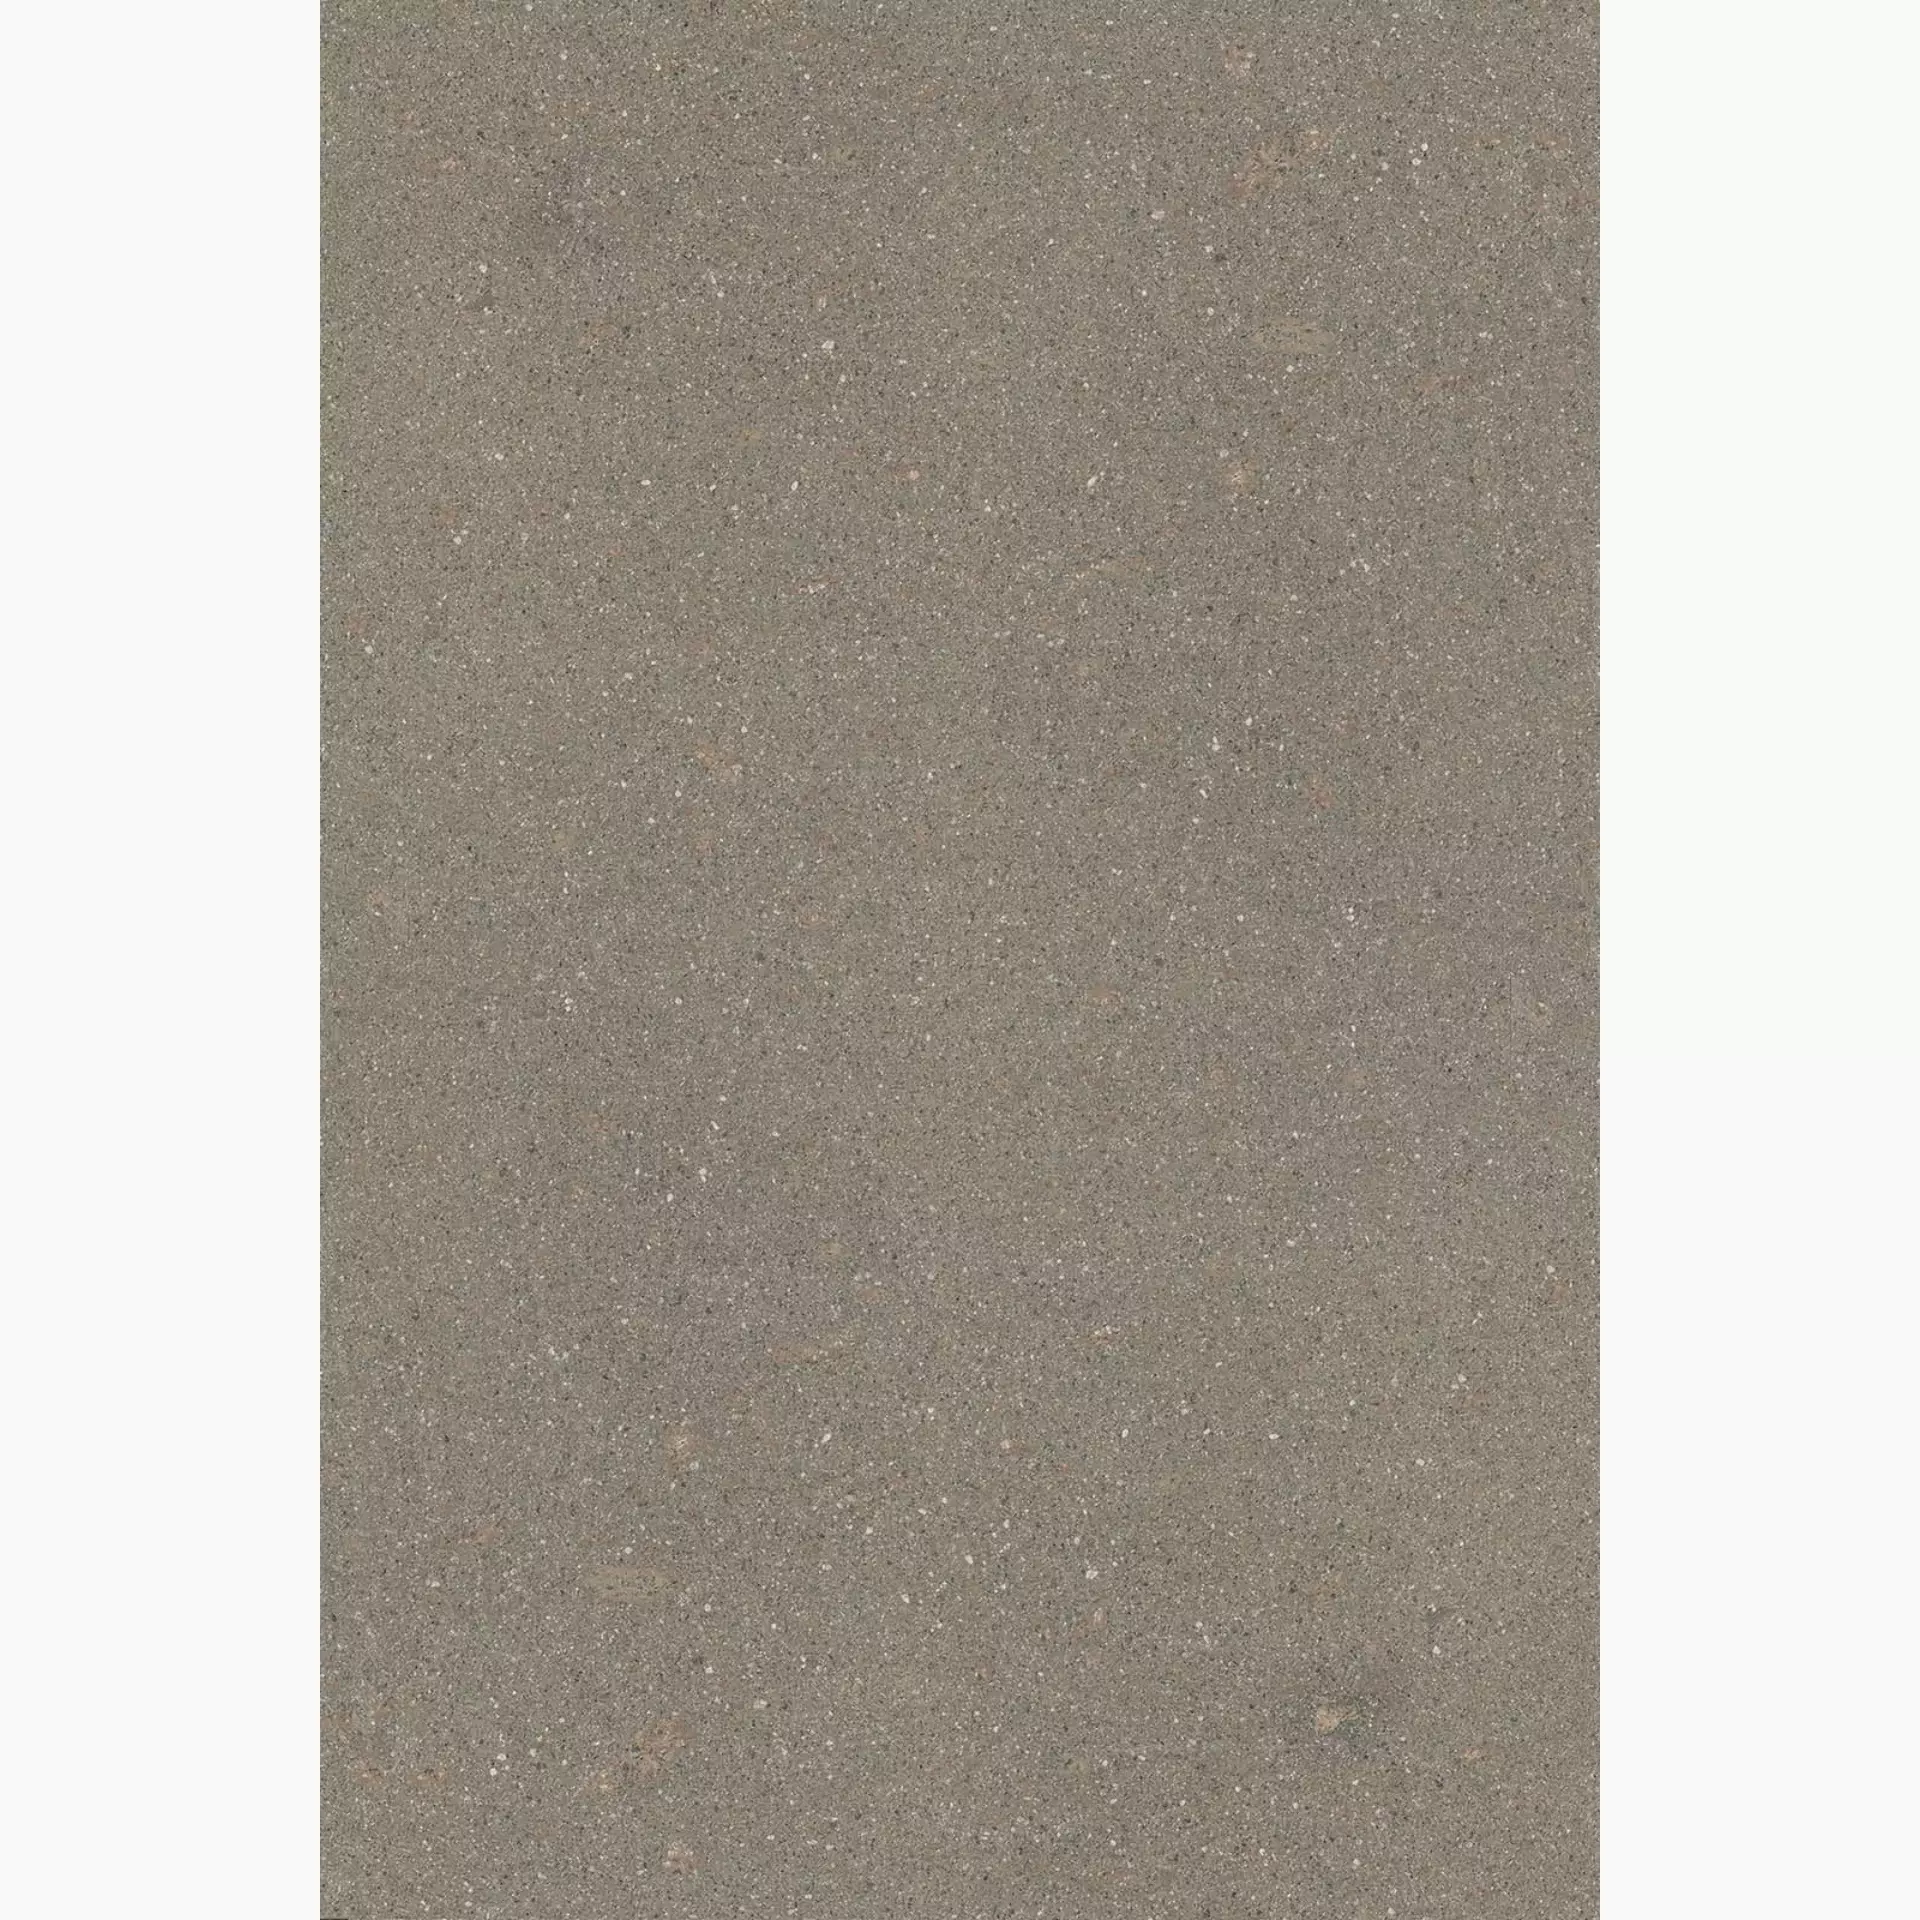 Keope Limes Porfido Cold Strutturato 46435732 60x90cm rectified 20mm